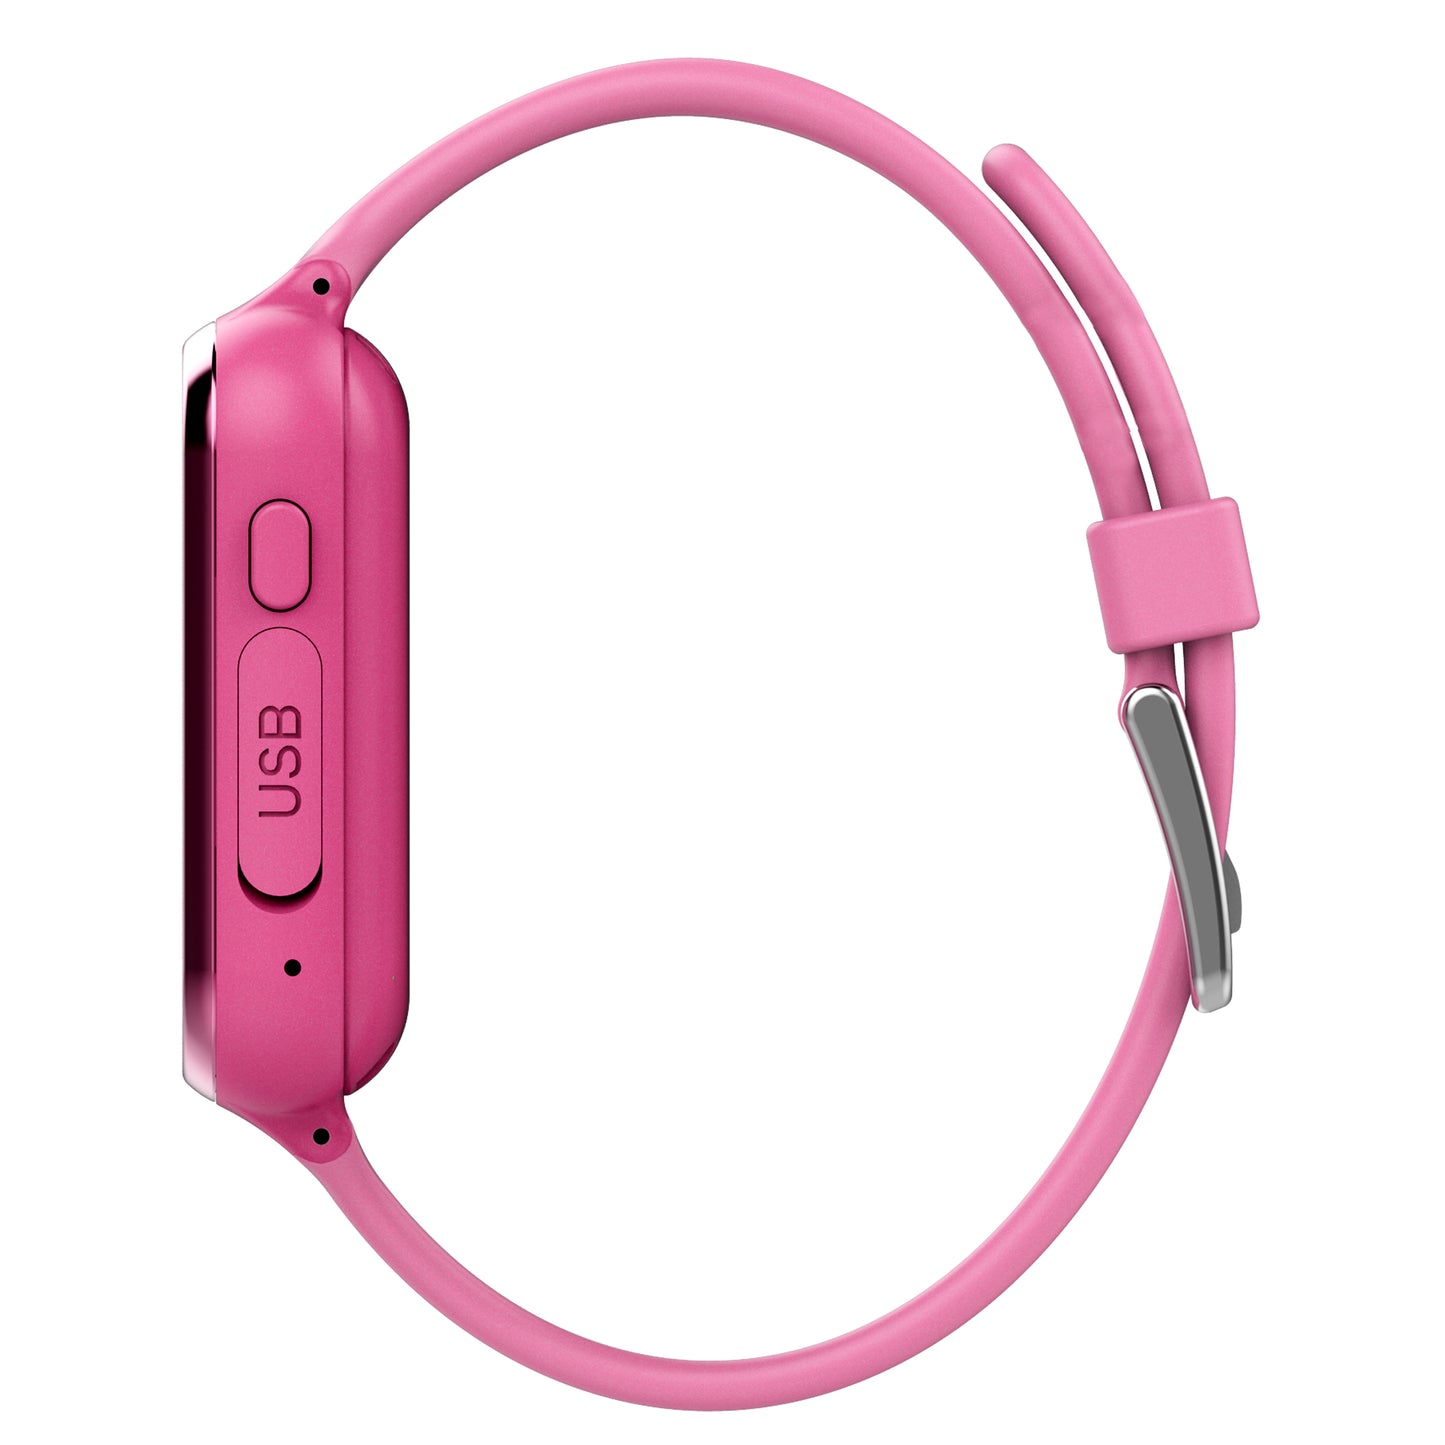 L.O.L. Surprise! Touch-Screen Smartwatch, Built in Selfie-Camera, Easy-to-Buckle Strap, Pink Smart Watch - Model: LOL4104